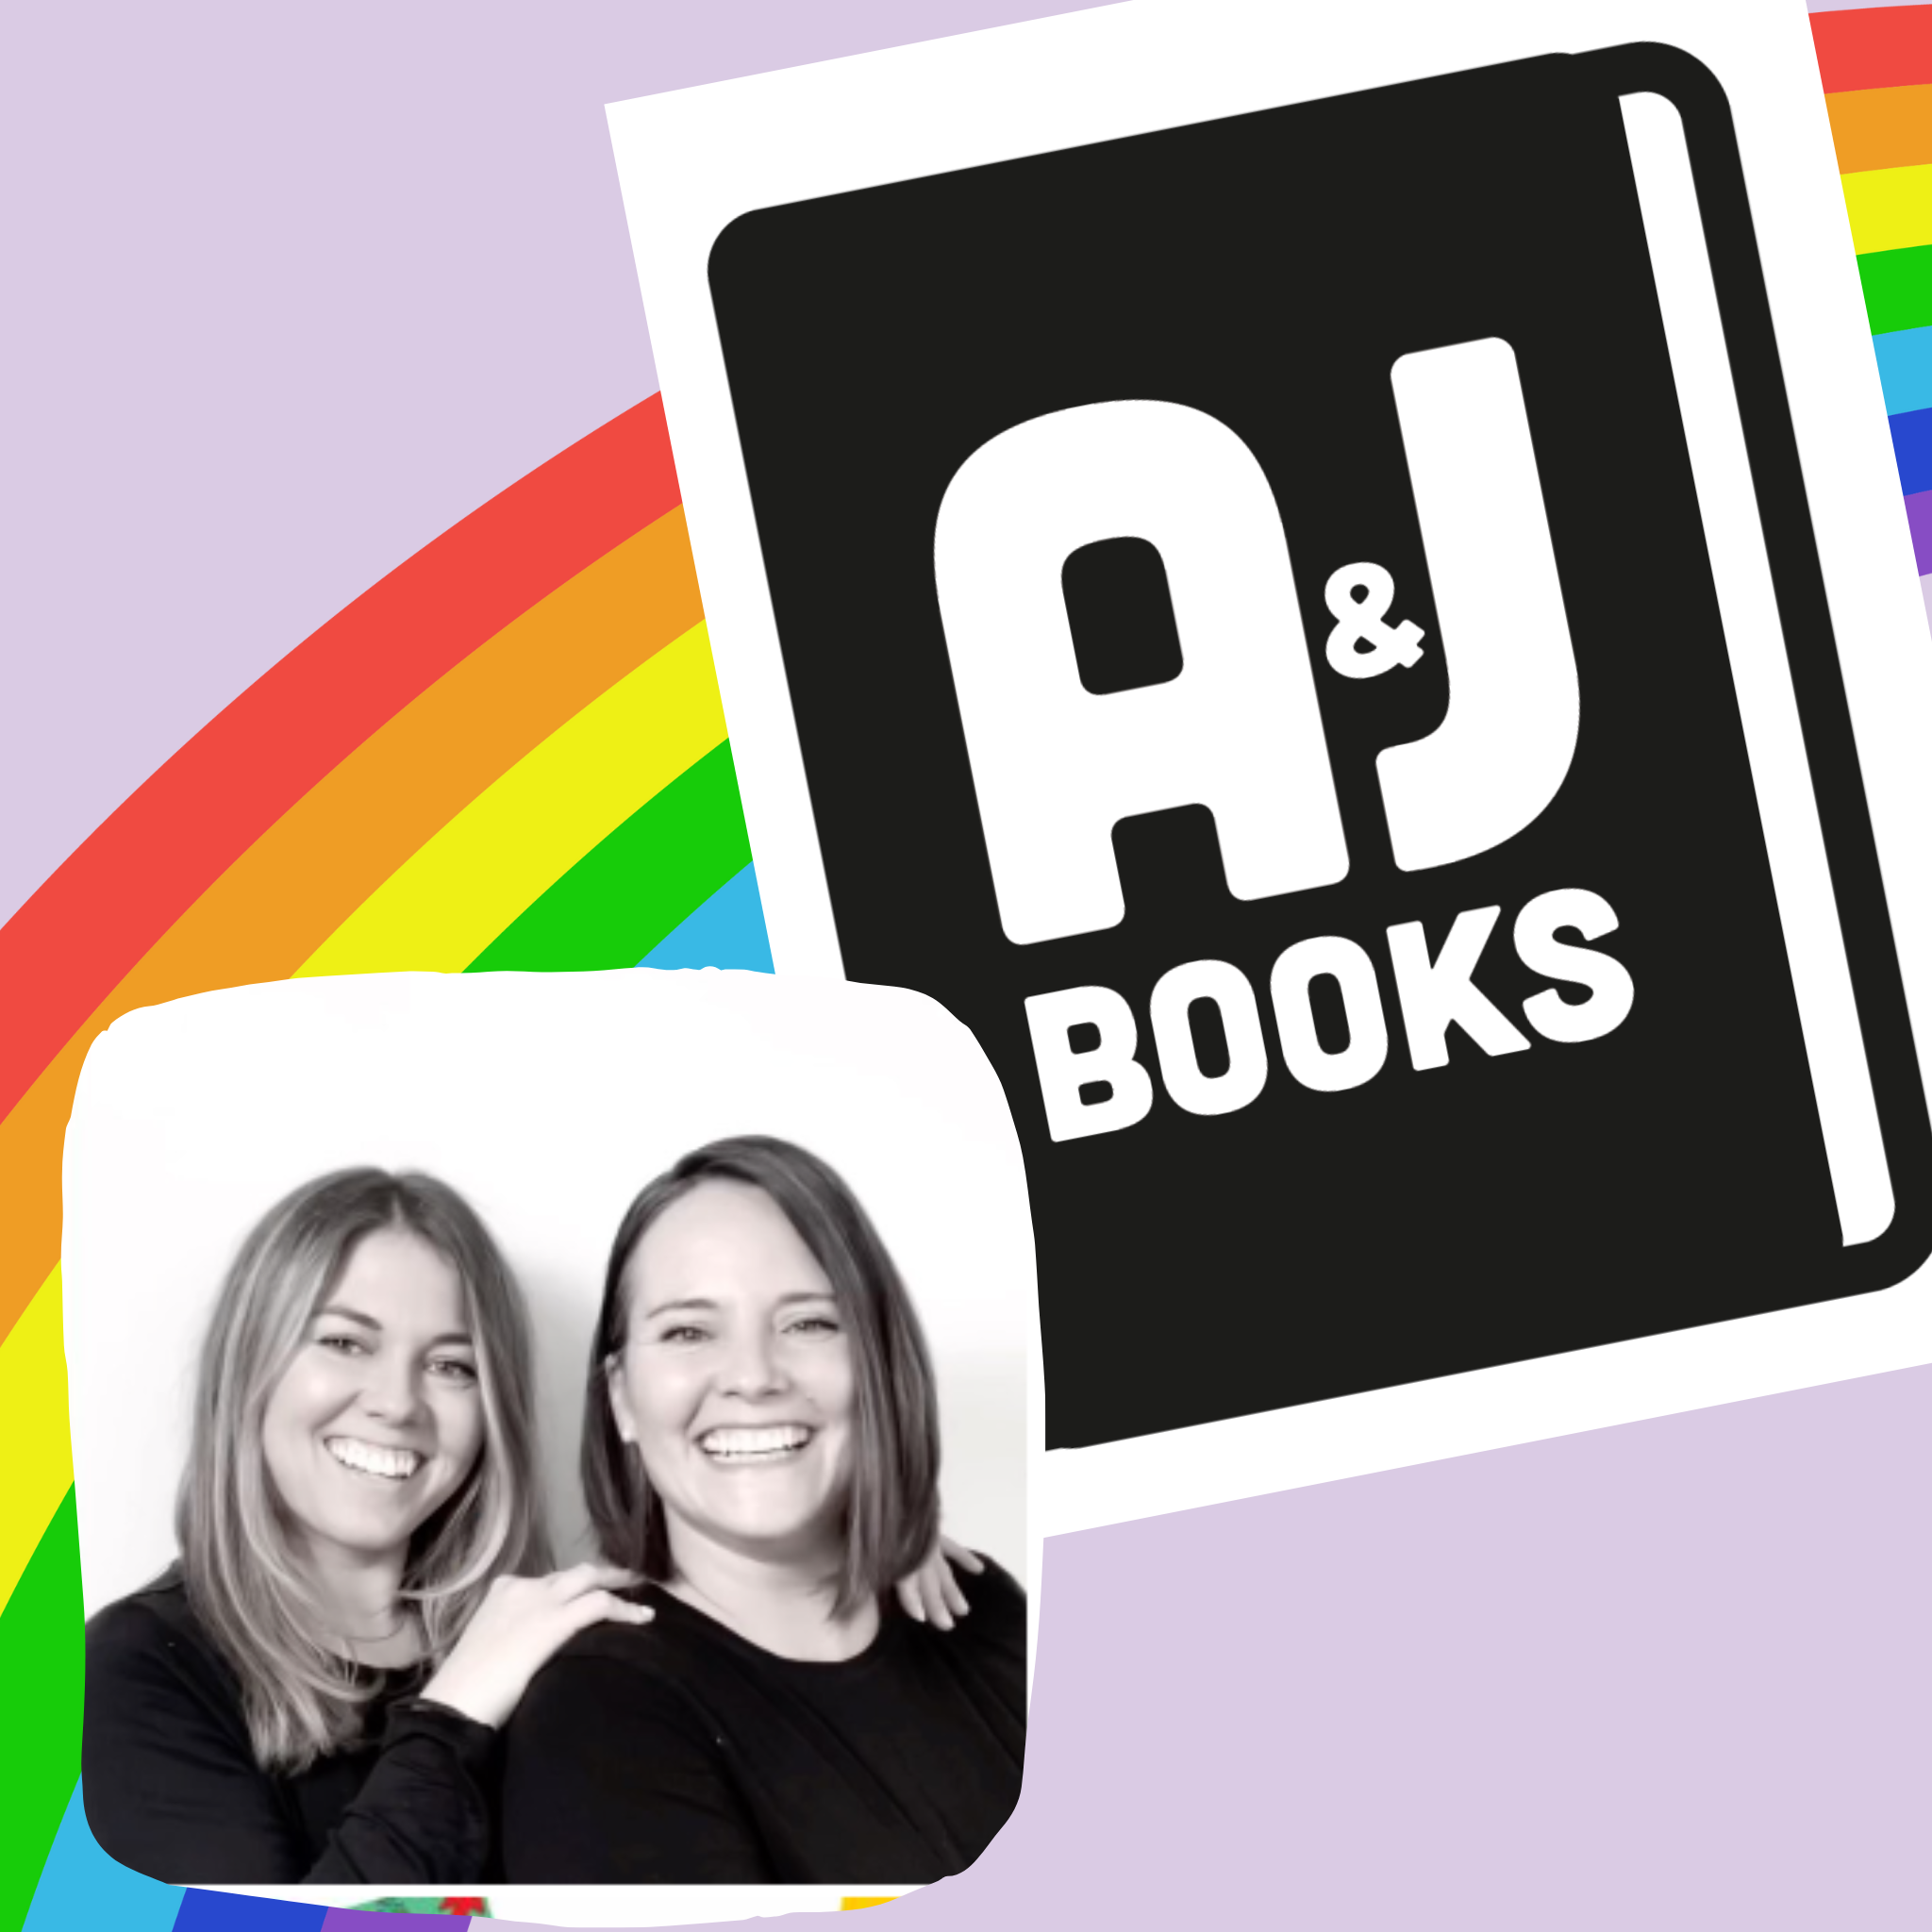 Sister creators of A and J Books, who self publish medium content books through Amazon KDP and Kindle Direct Publishing